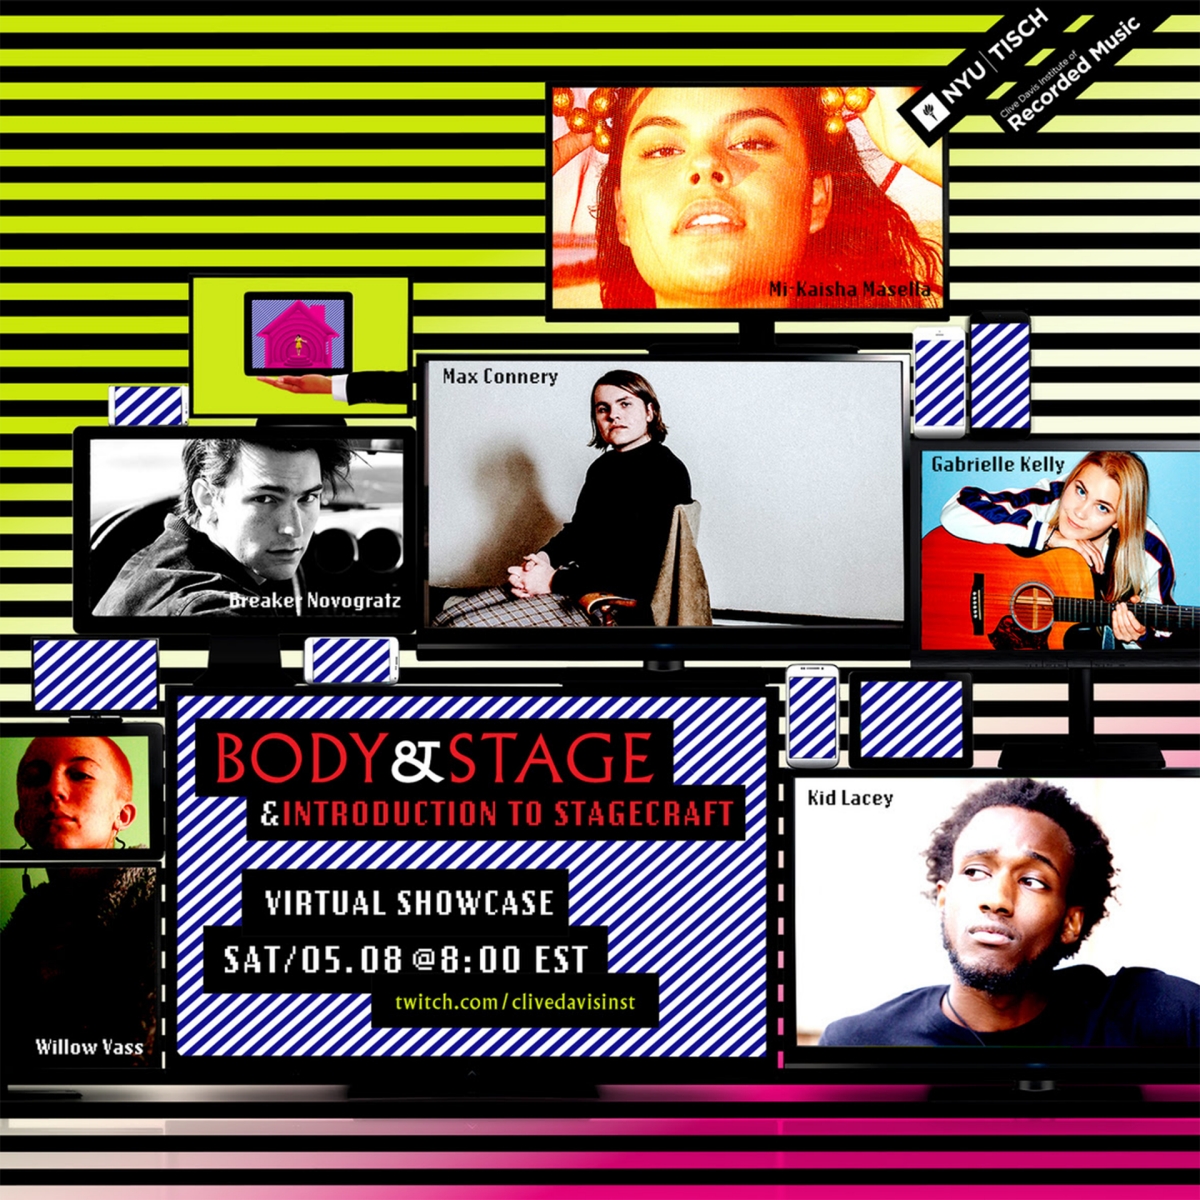 Body and The Stage/Stagecraft Virtual Showcase Flyer